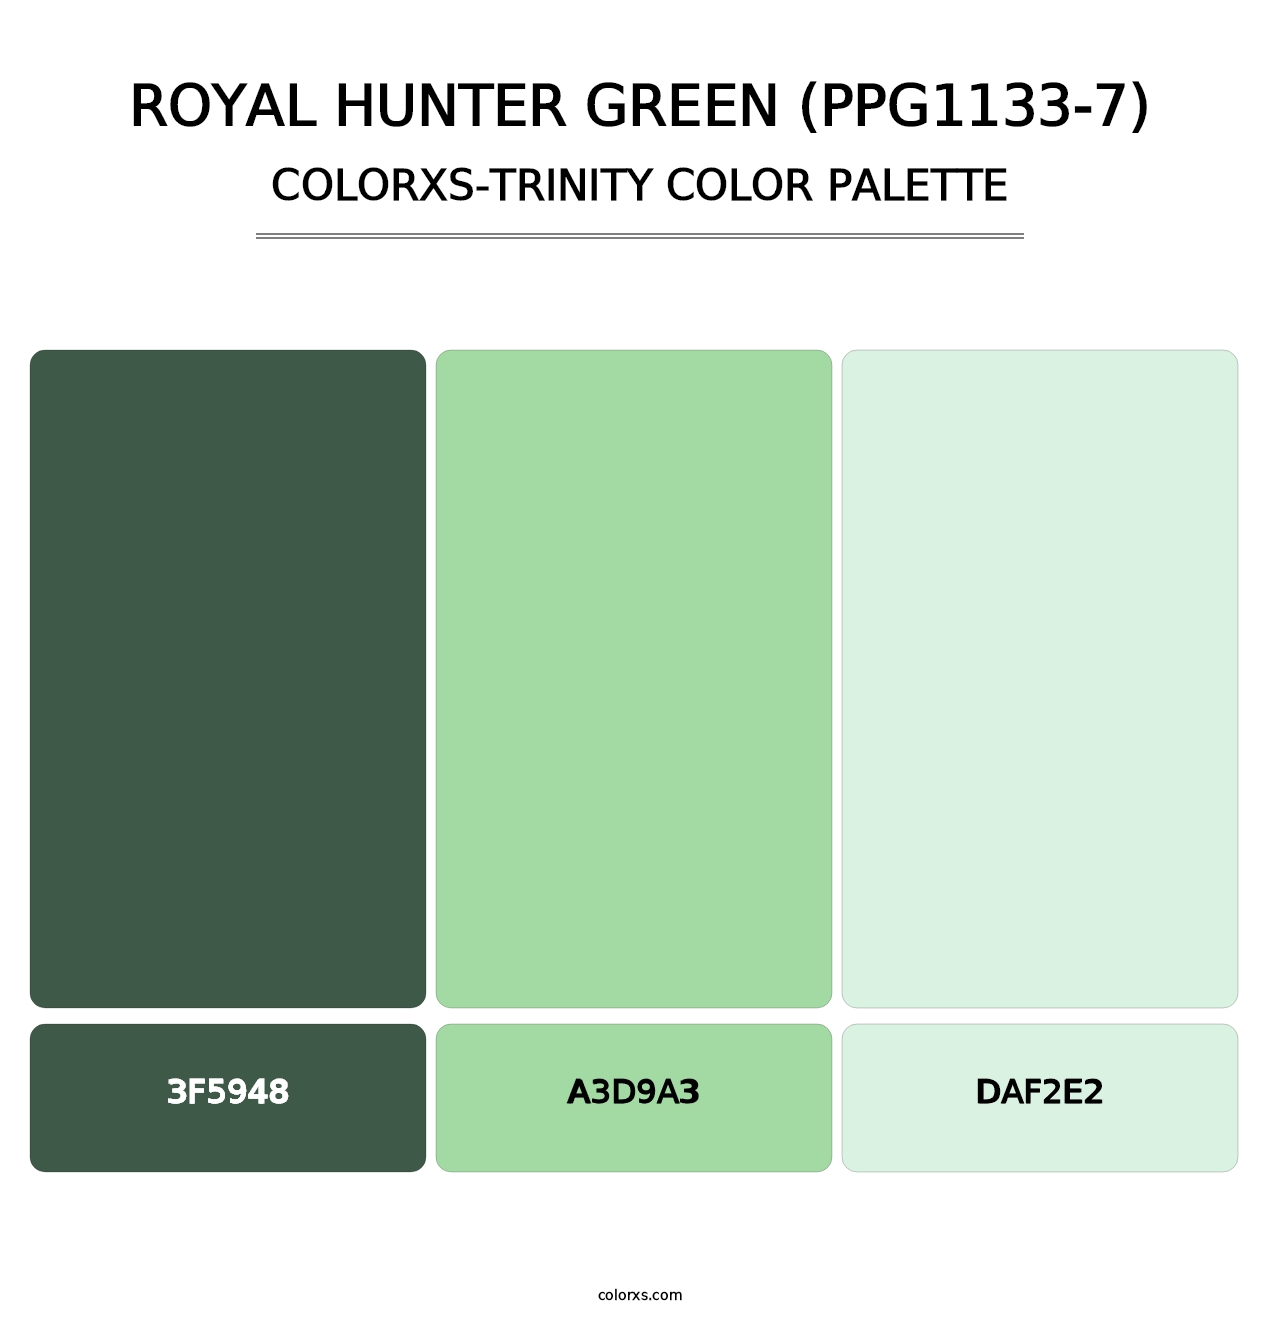 Royal Hunter Green (PPG1133-7) - Colorxs Trinity Palette